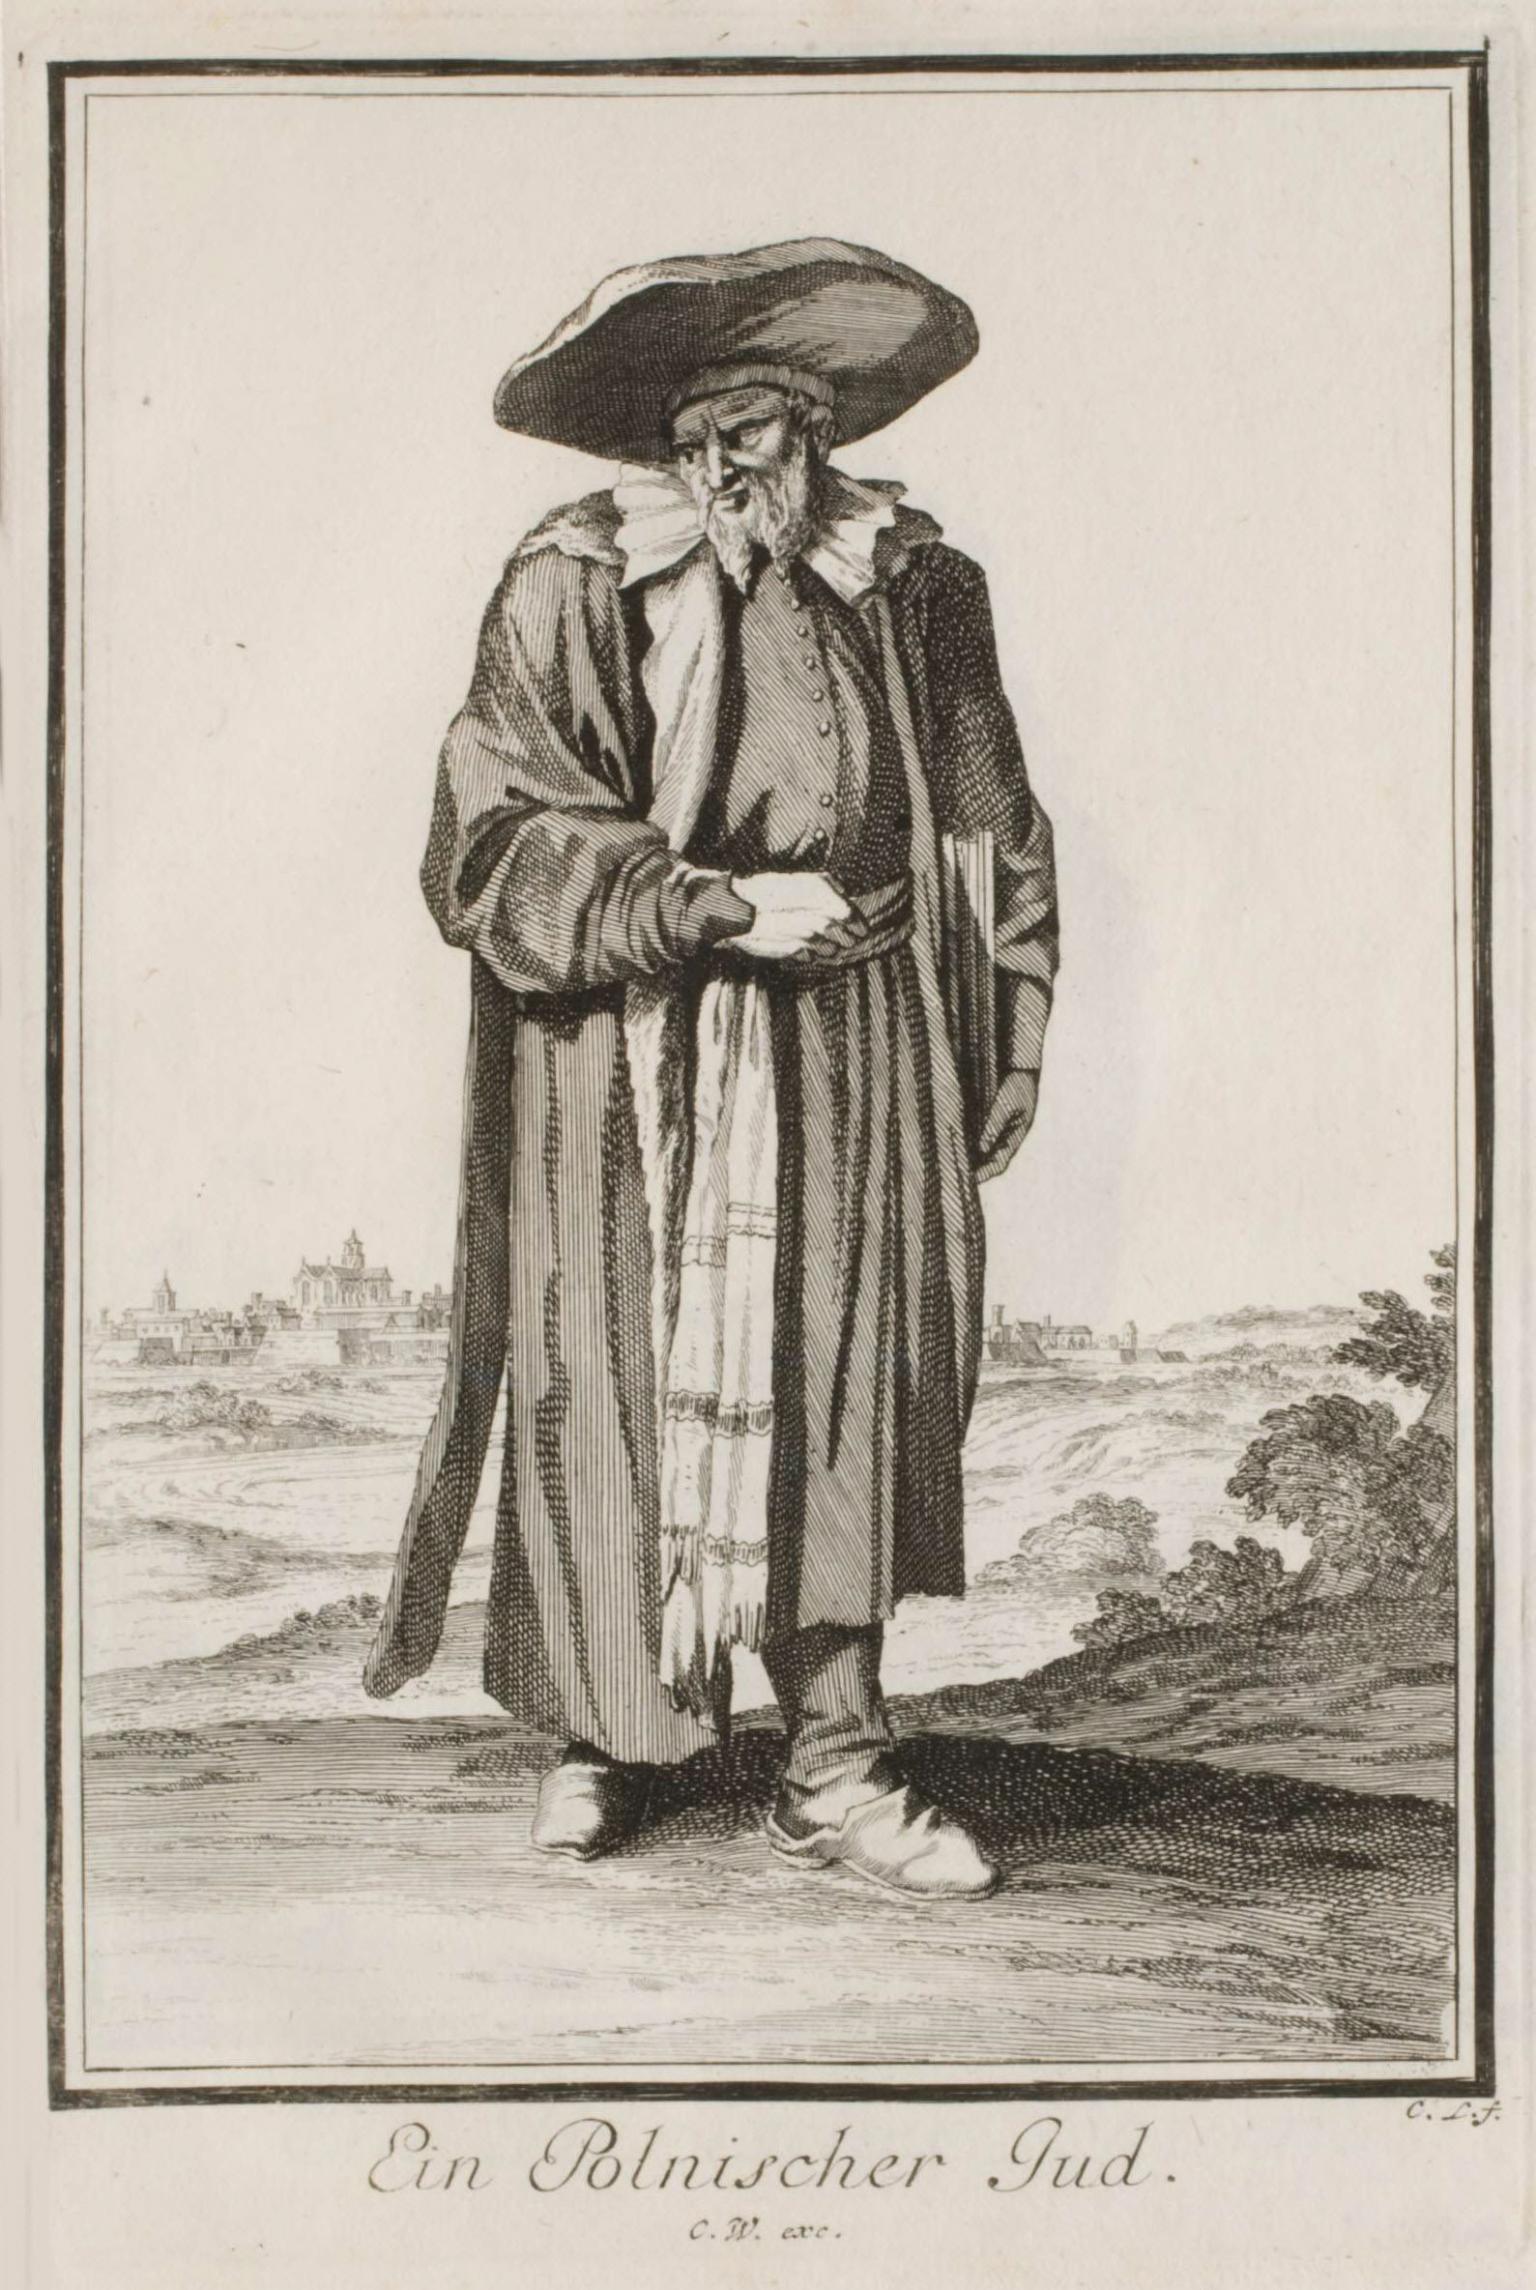 Print of man standing wearing wide-brimmed hat.